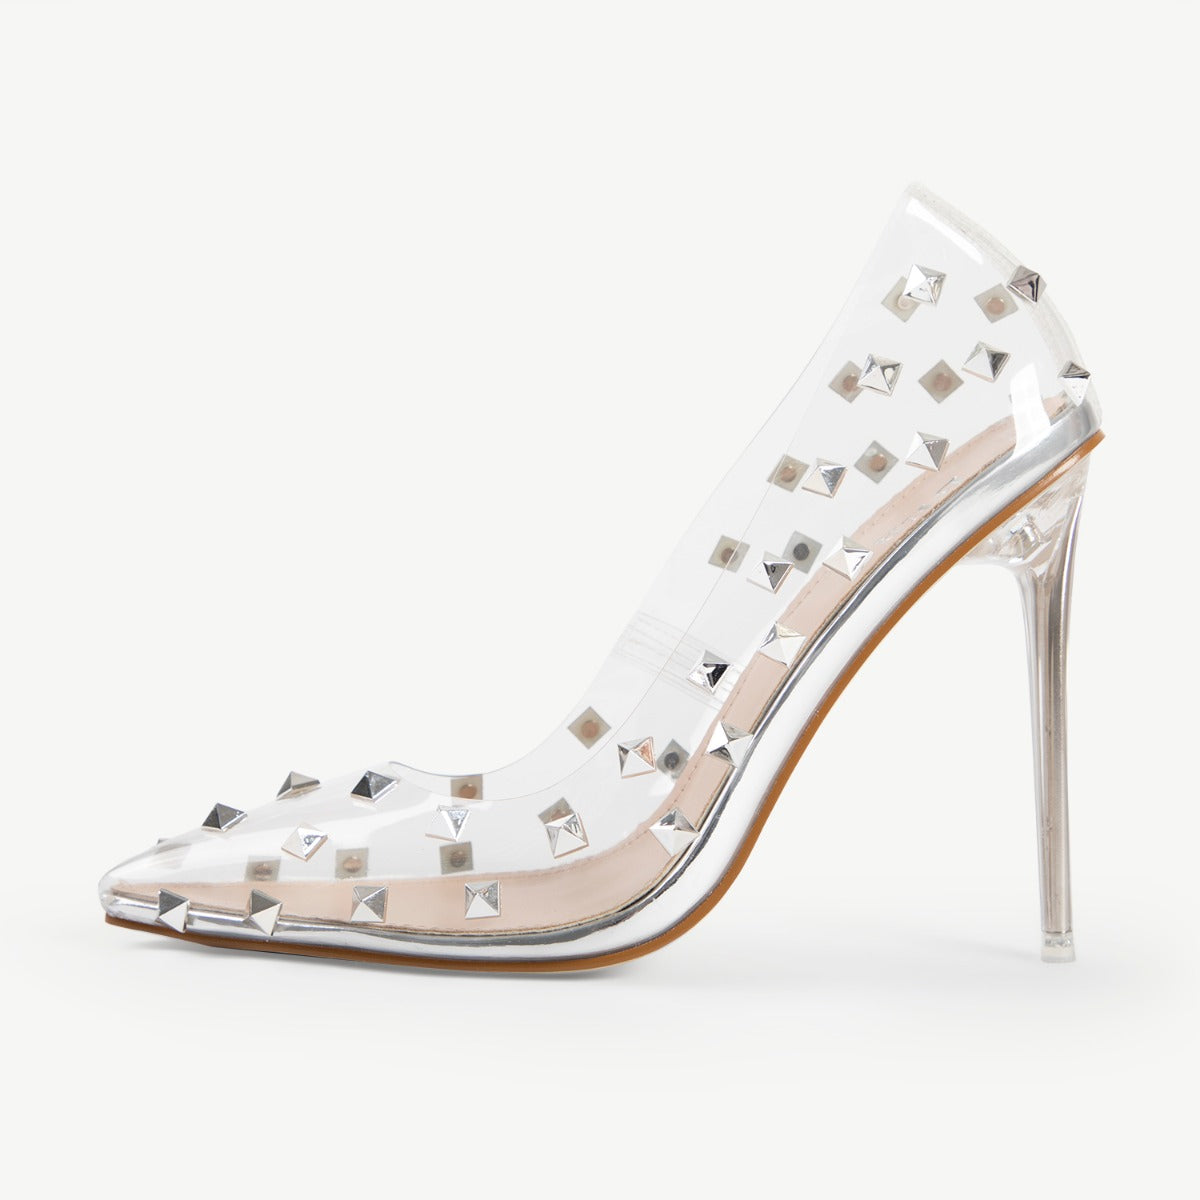 BEBO Mayra Perspex Court Shoe in Silver